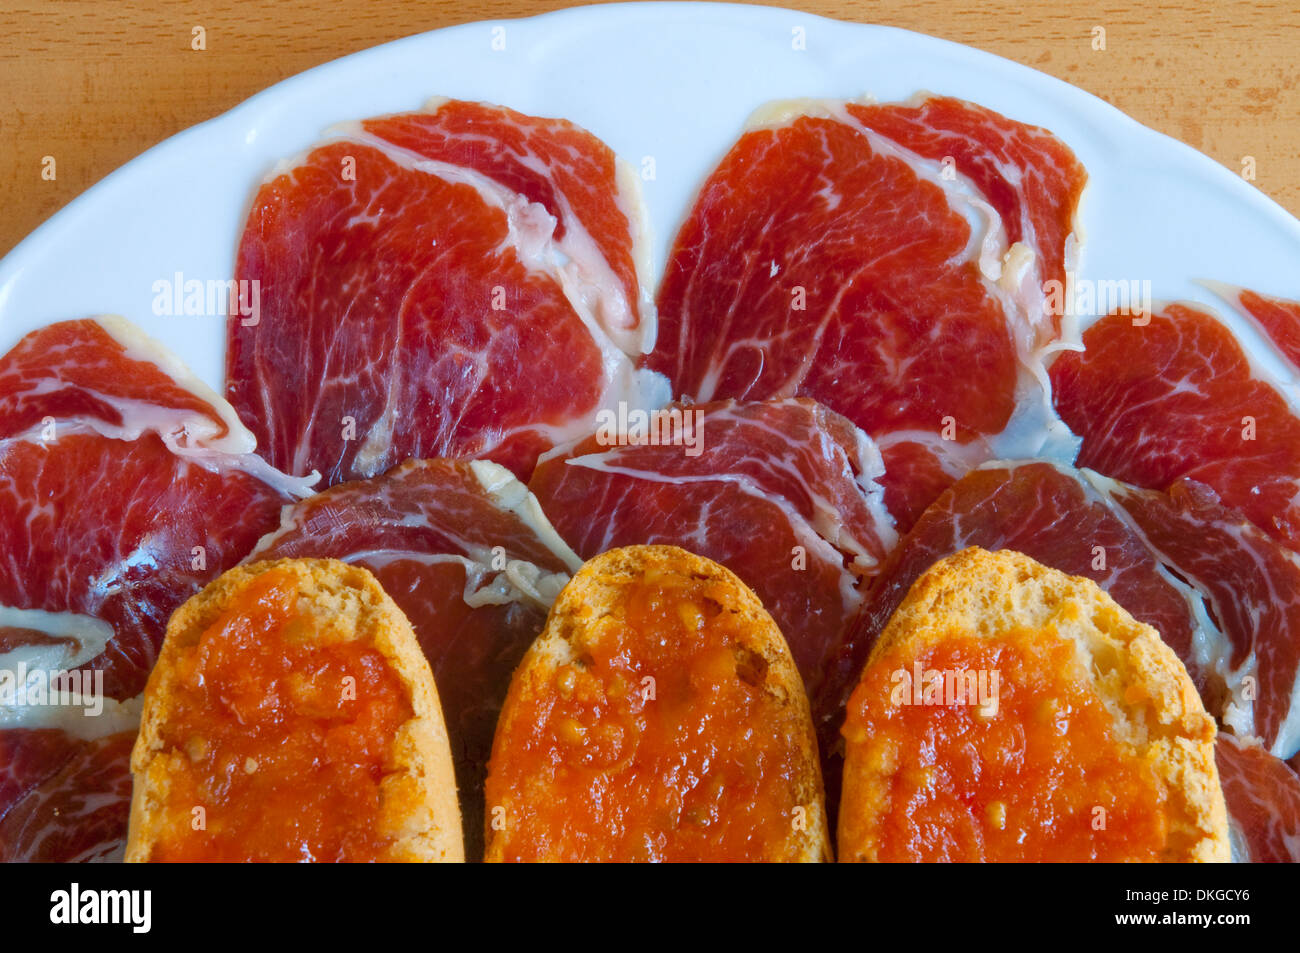 Iberian ham and bread with tomato sauce. Close view. Stock Photo